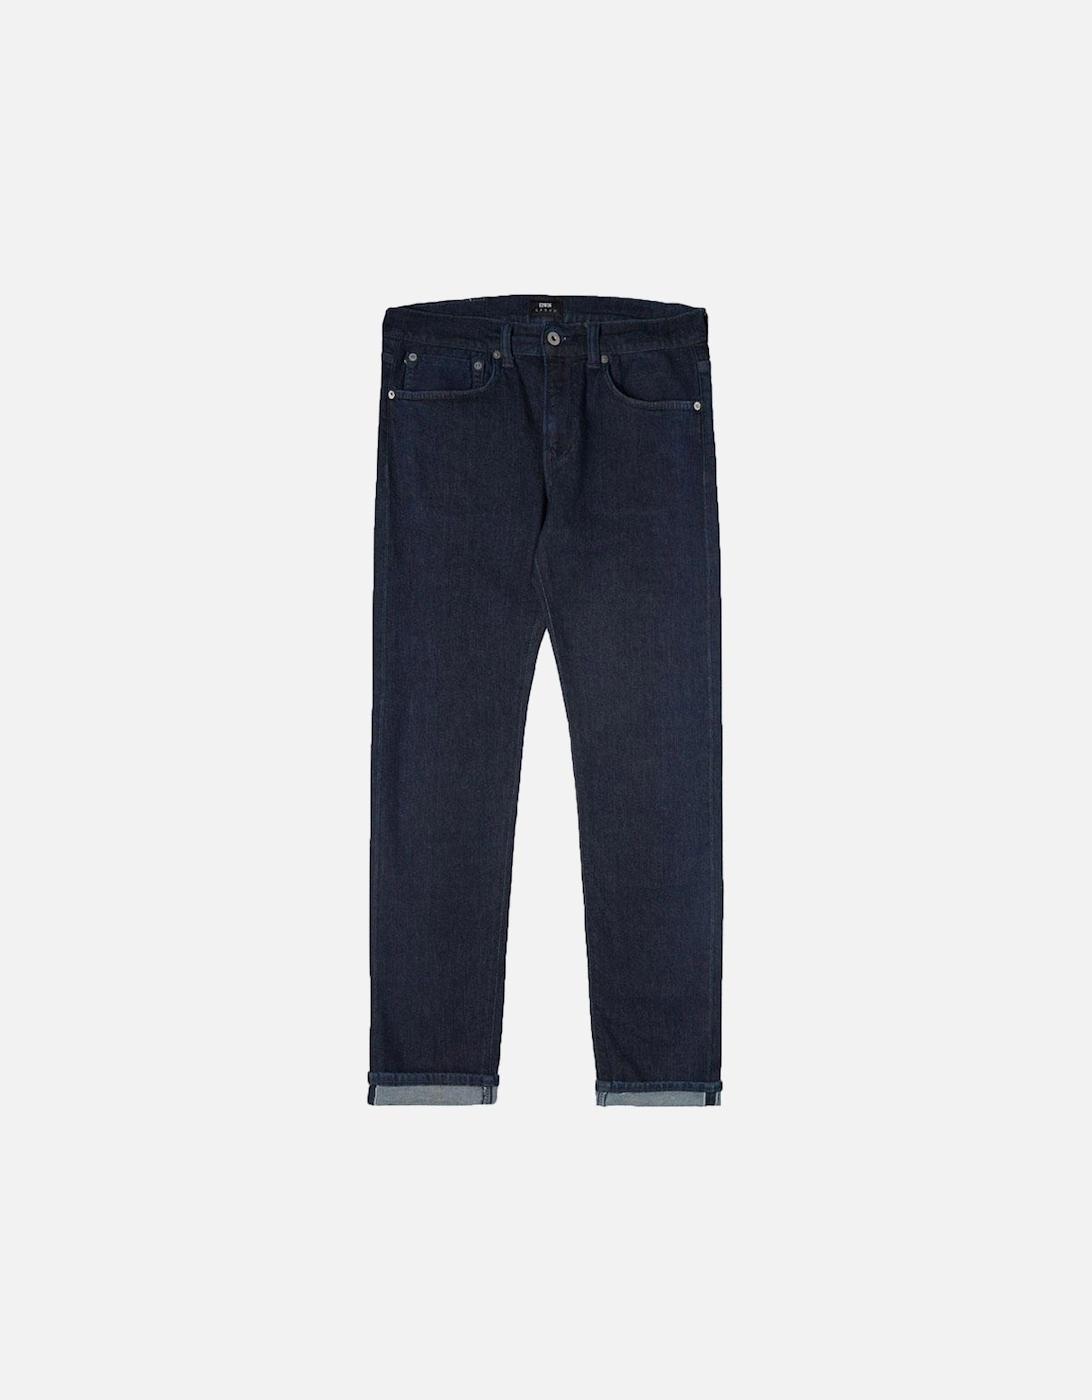 ED-80 Slim Tapered Jeans CS Red Listed Blue Denim - Rinsed, 4 of 3